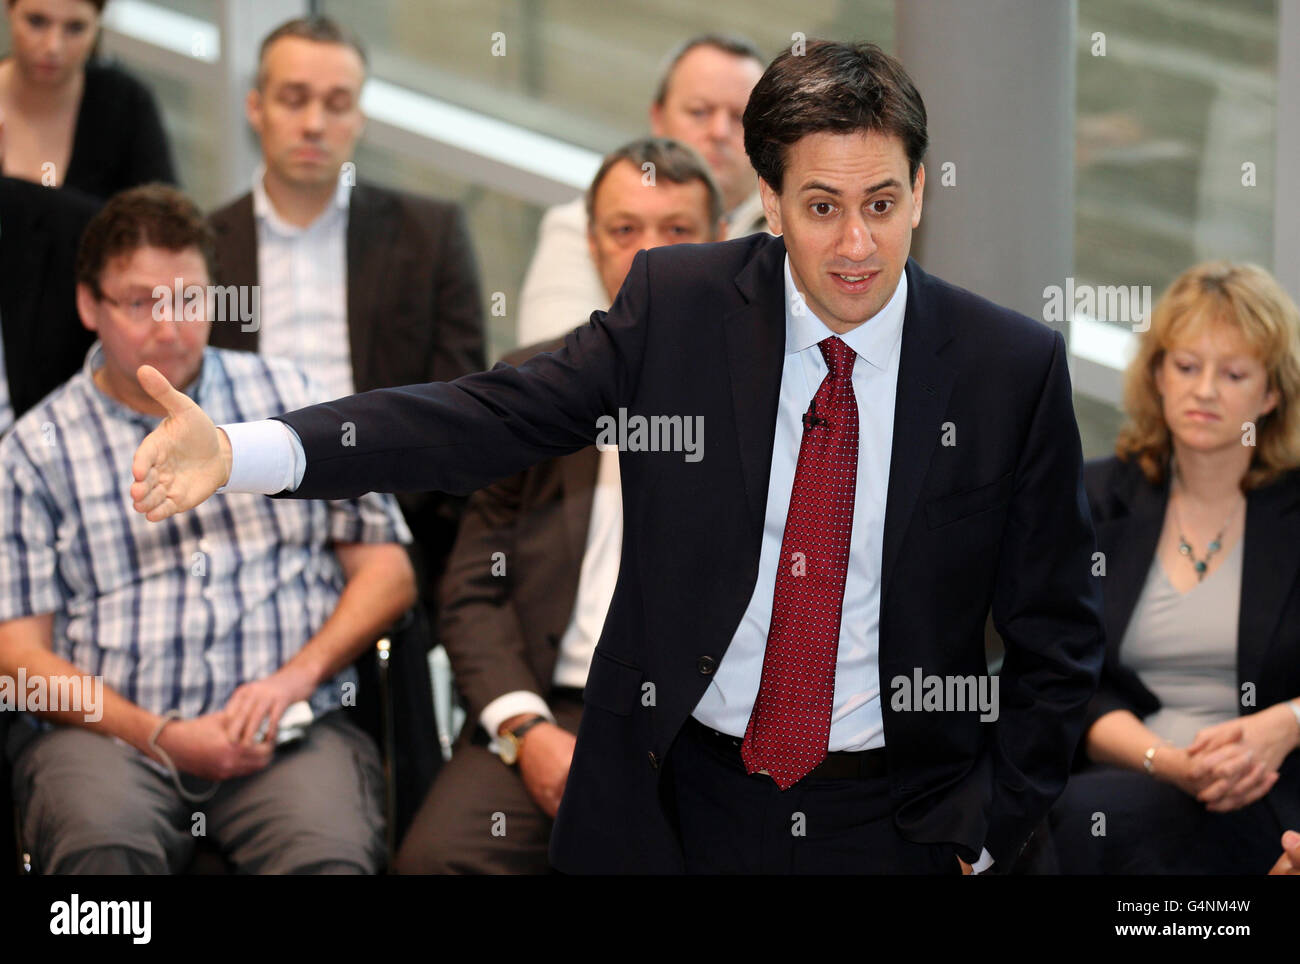 Labour Party leader Ed Miliband takes questions during a visit to TTP group in Melbourn, Cambridgeshire. Stock Photo